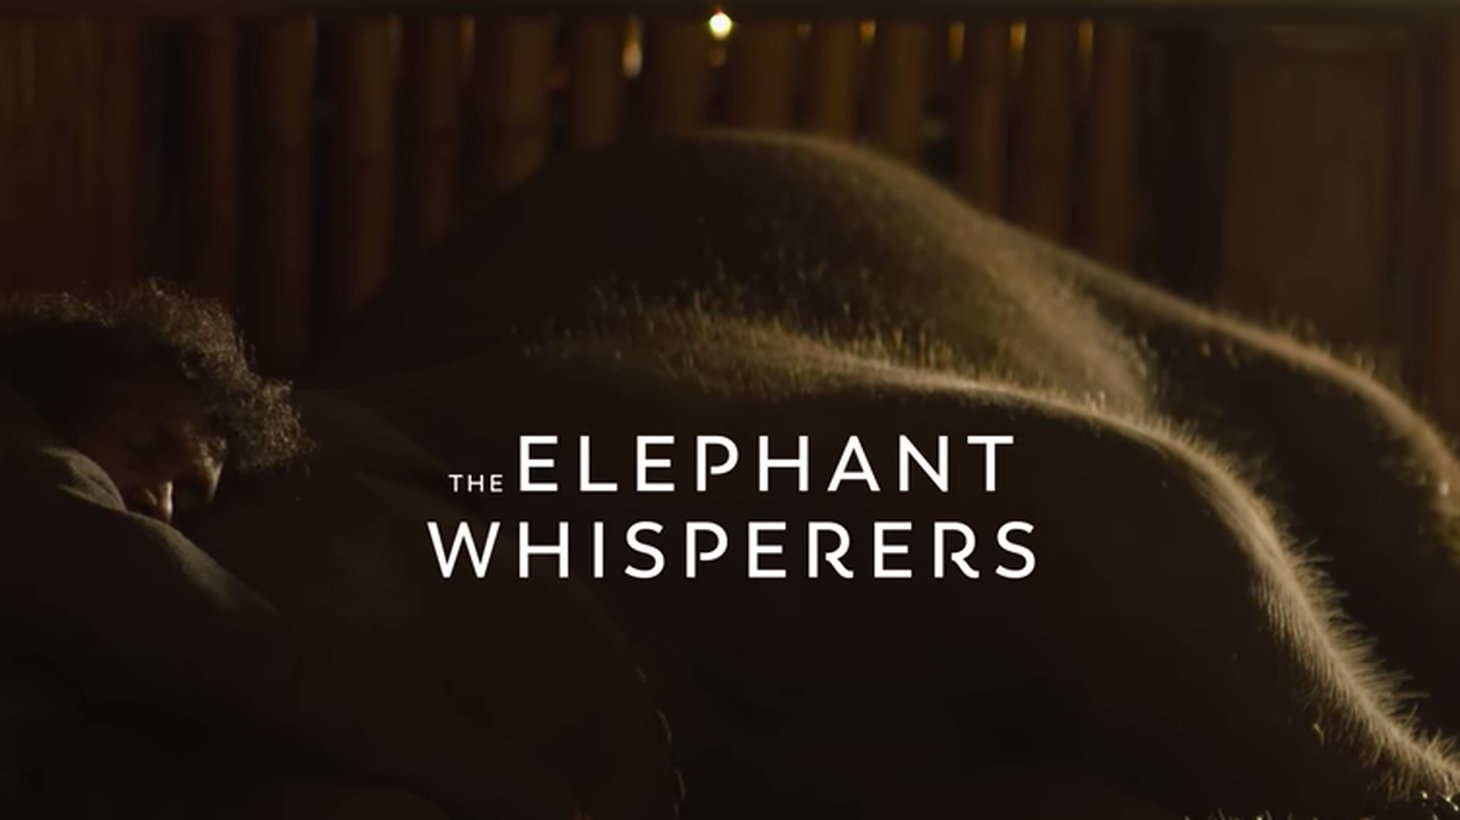 “The Elephant Whisperers” follows a couple in South India who decides to foster a baby elephant.